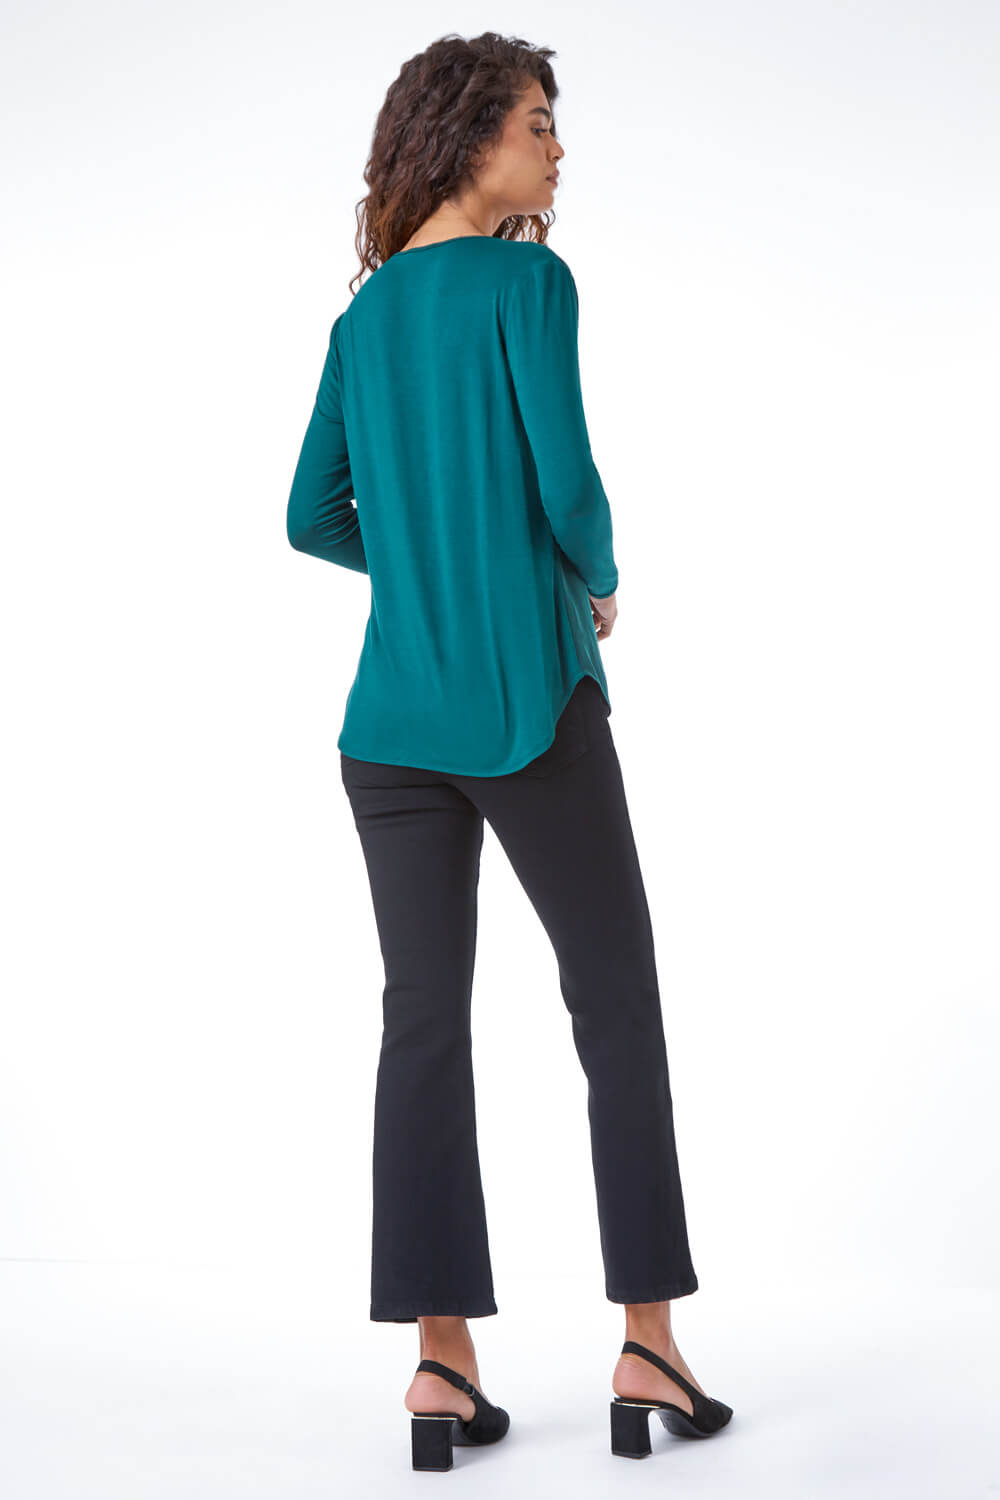 Green Frill Detail V-Neck Top, Image 3 of 5